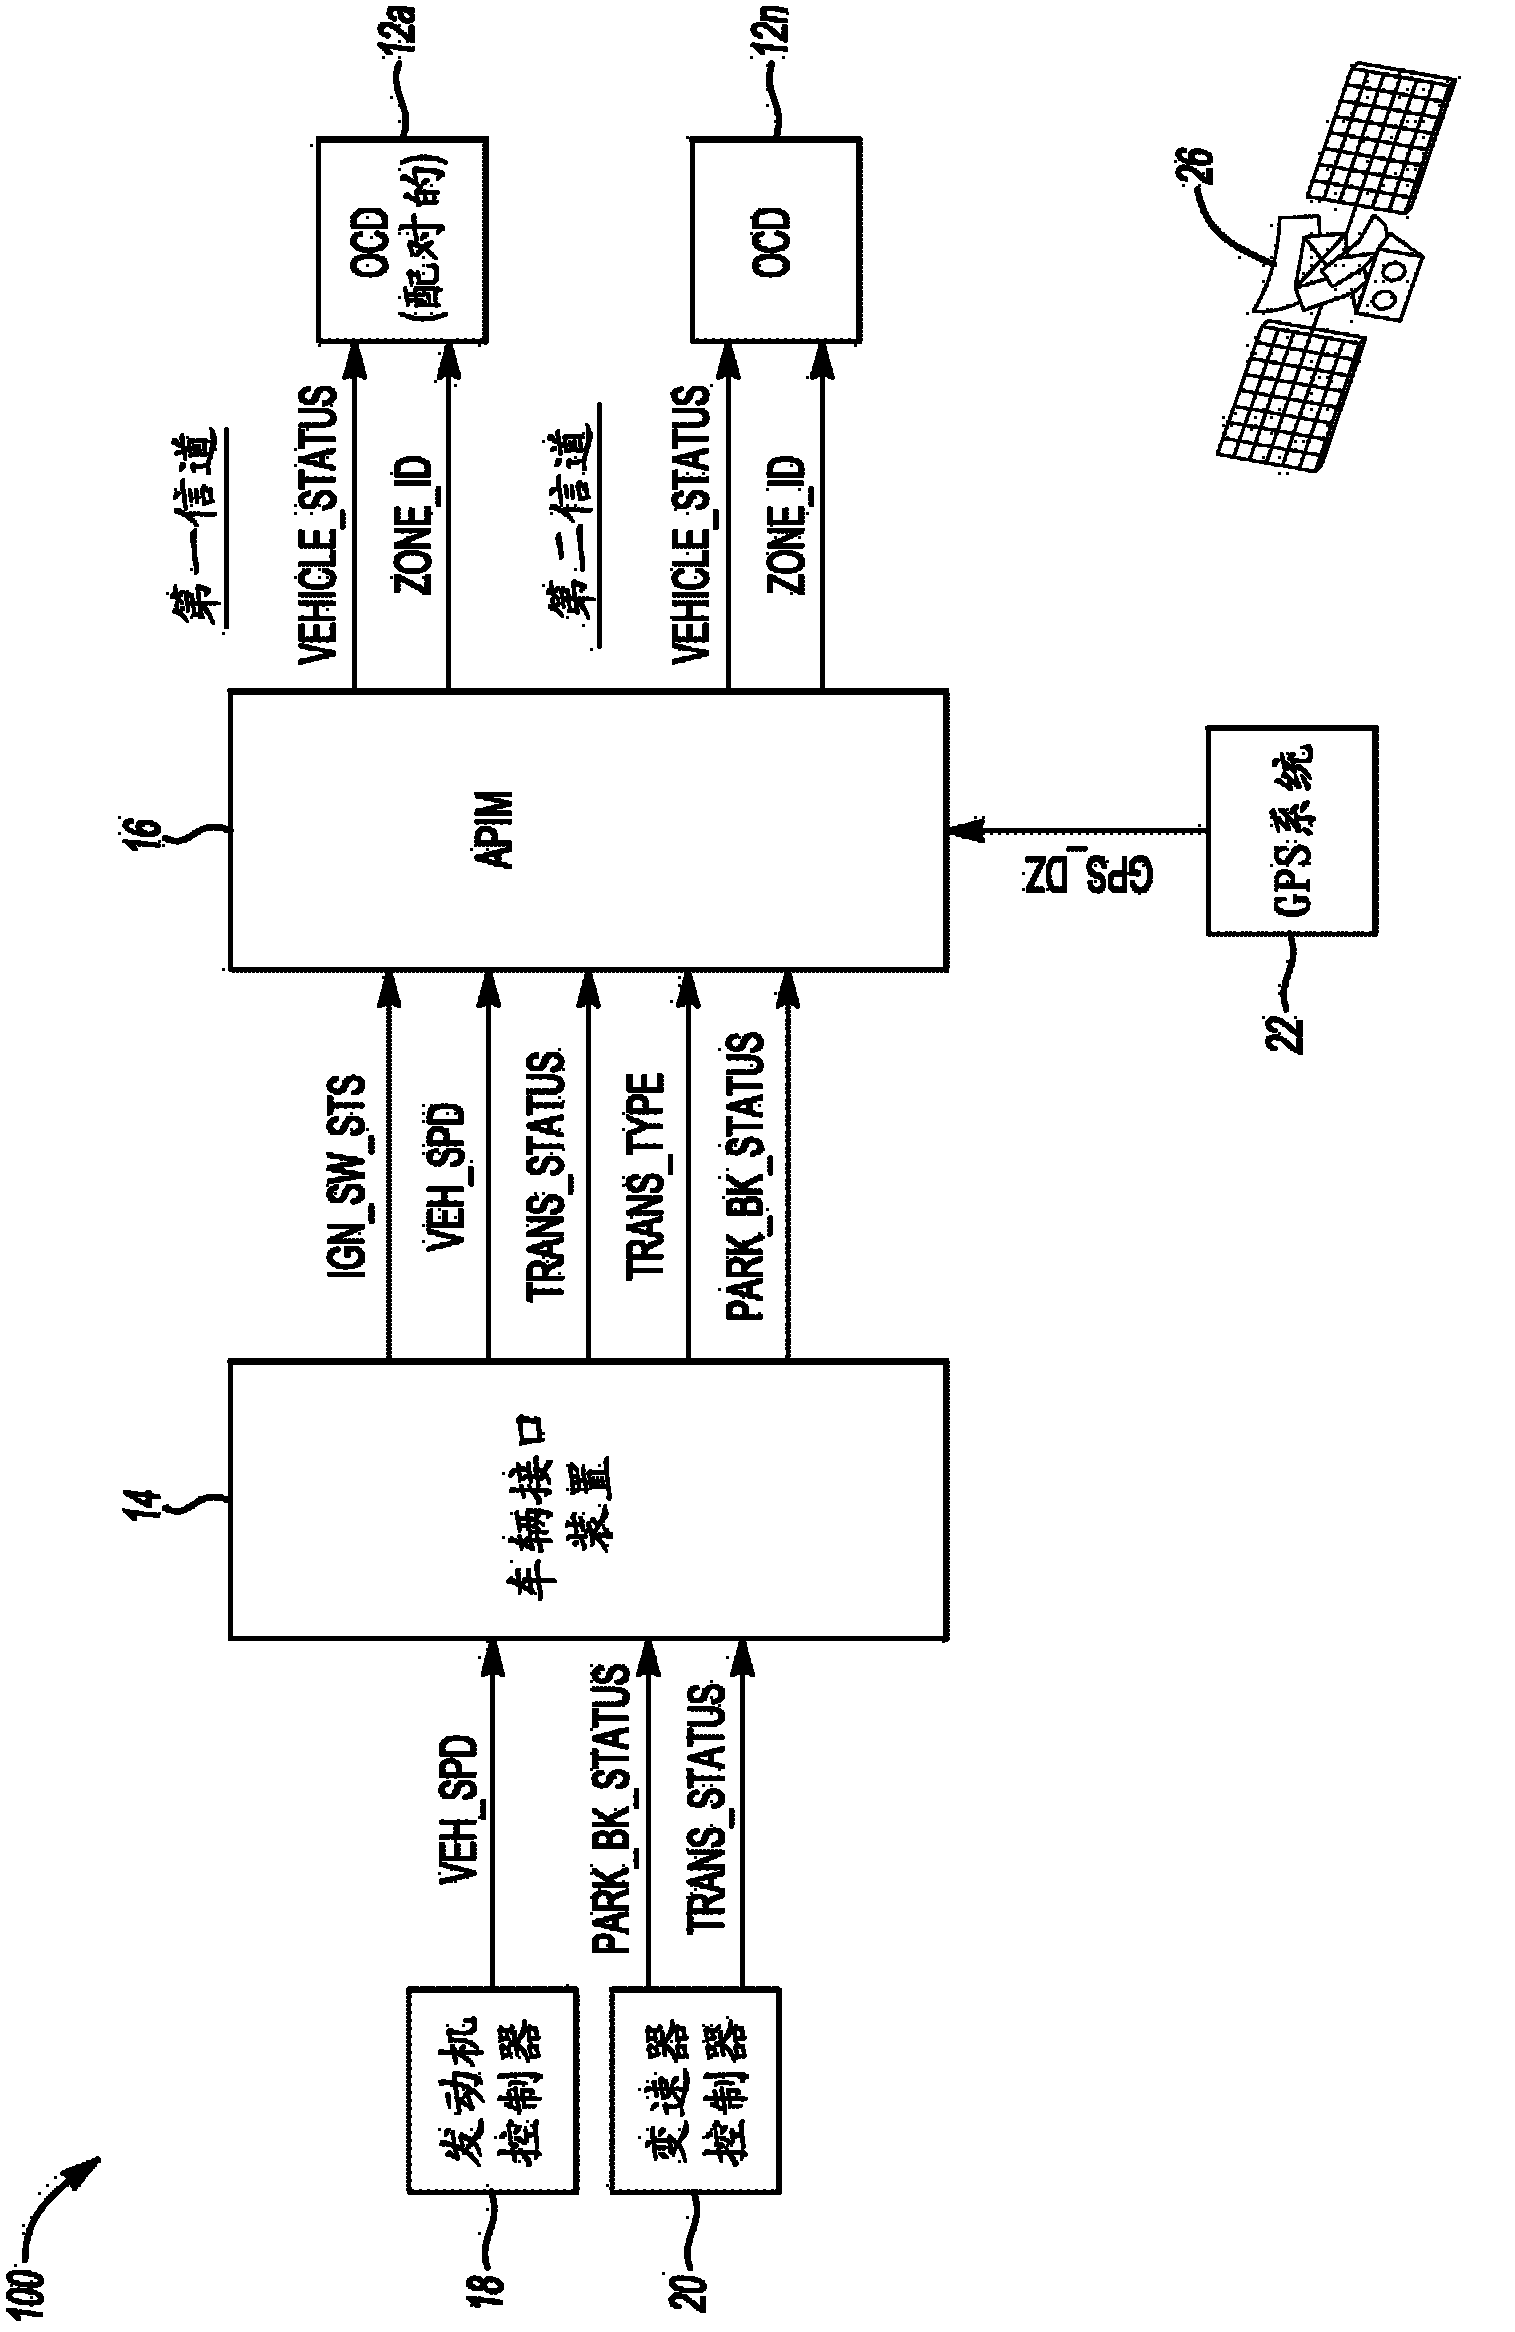 System and method for cell phone restriction